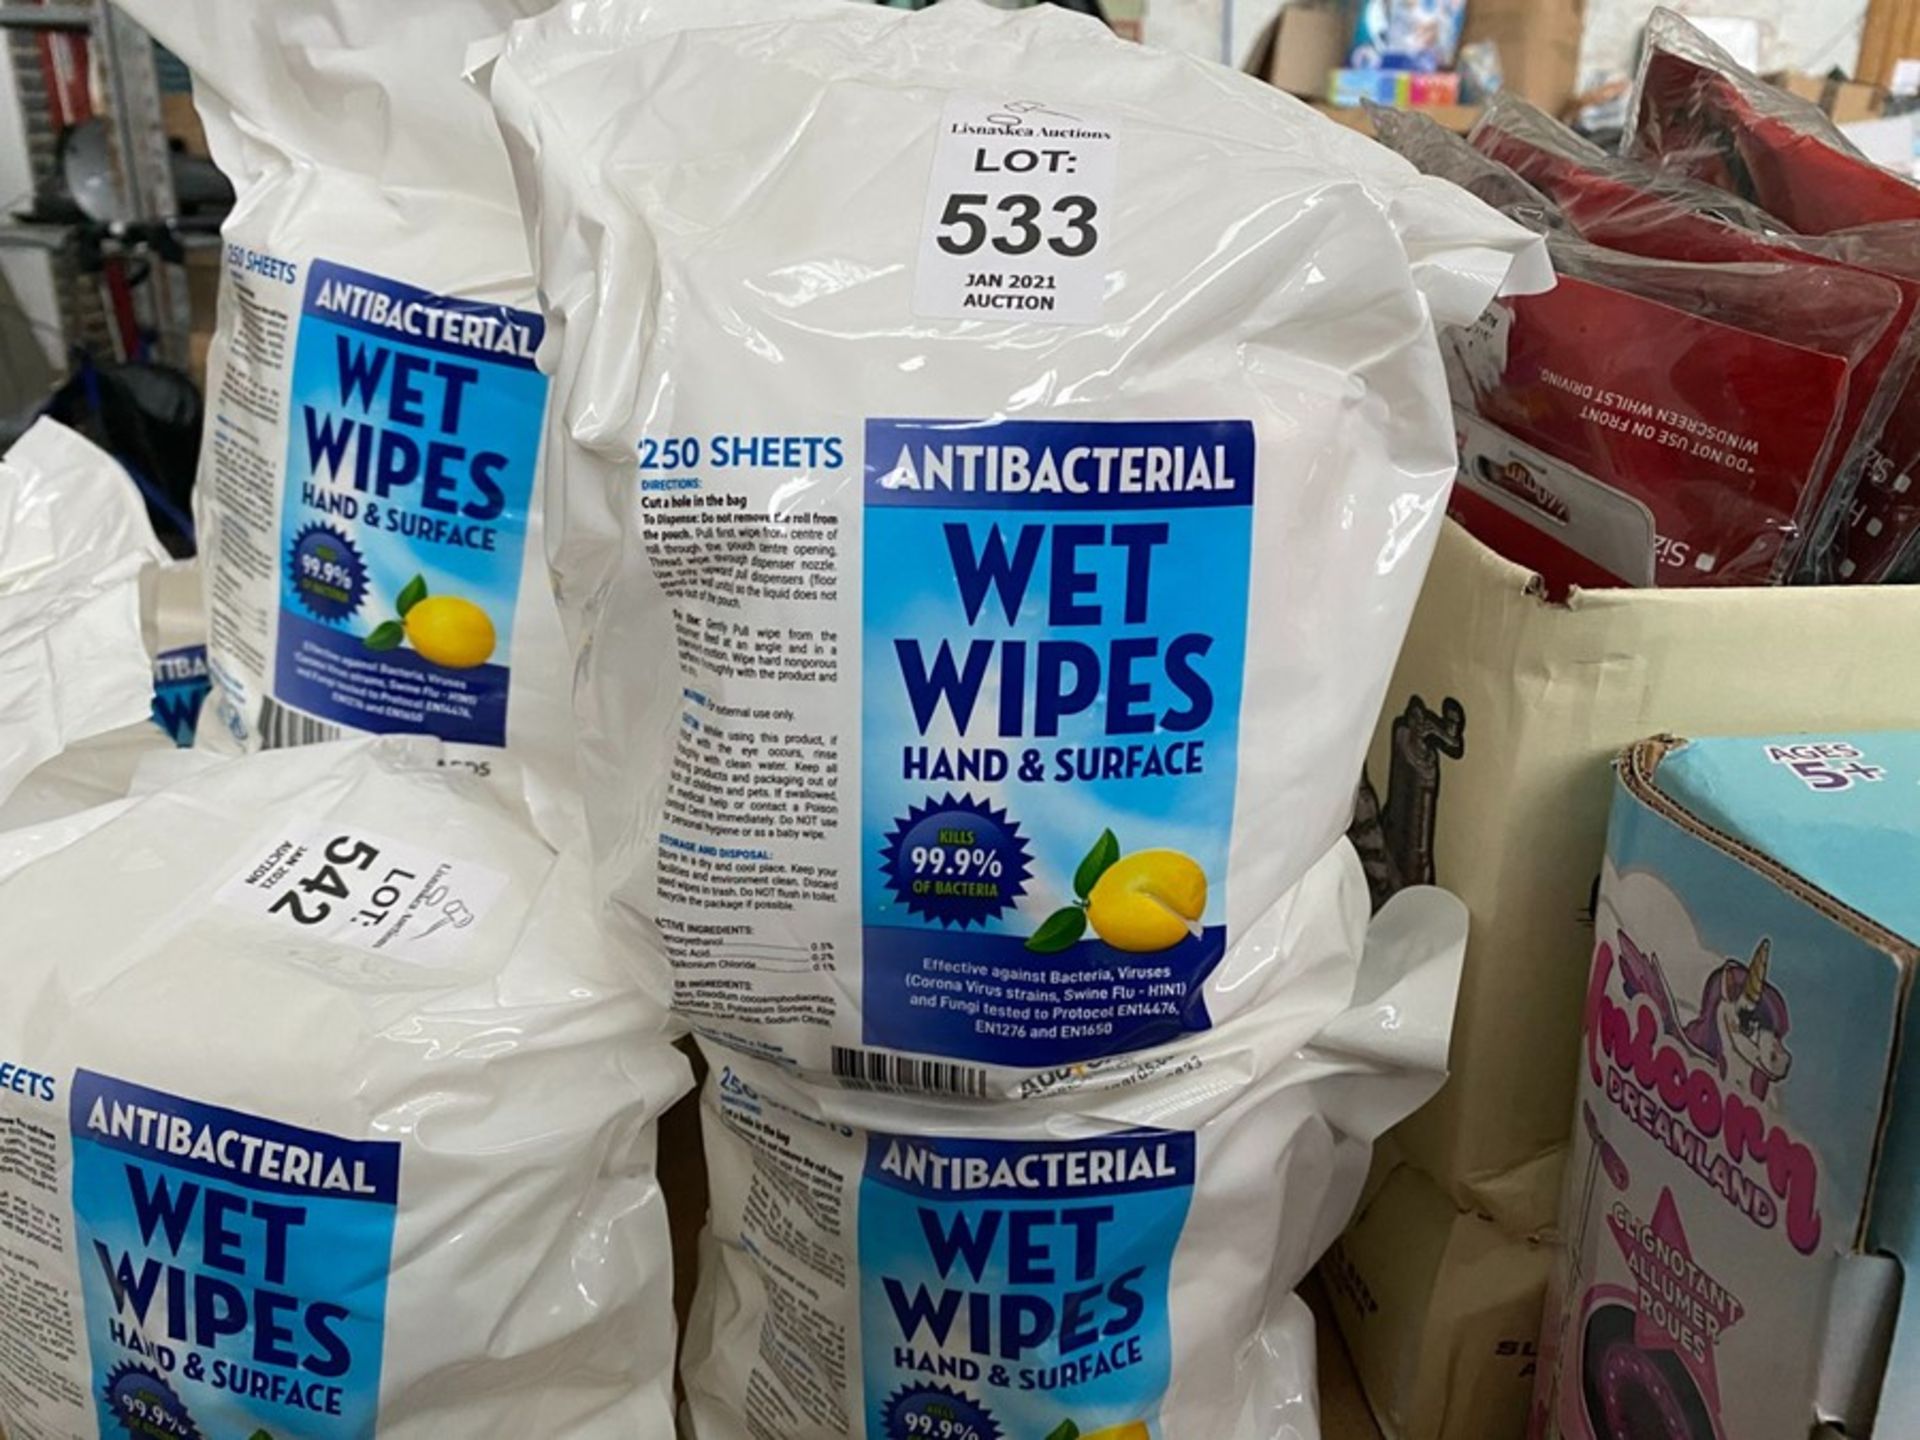 PACK OF 250 SHEETS OF ANTIBACTERIAL WET WIPES